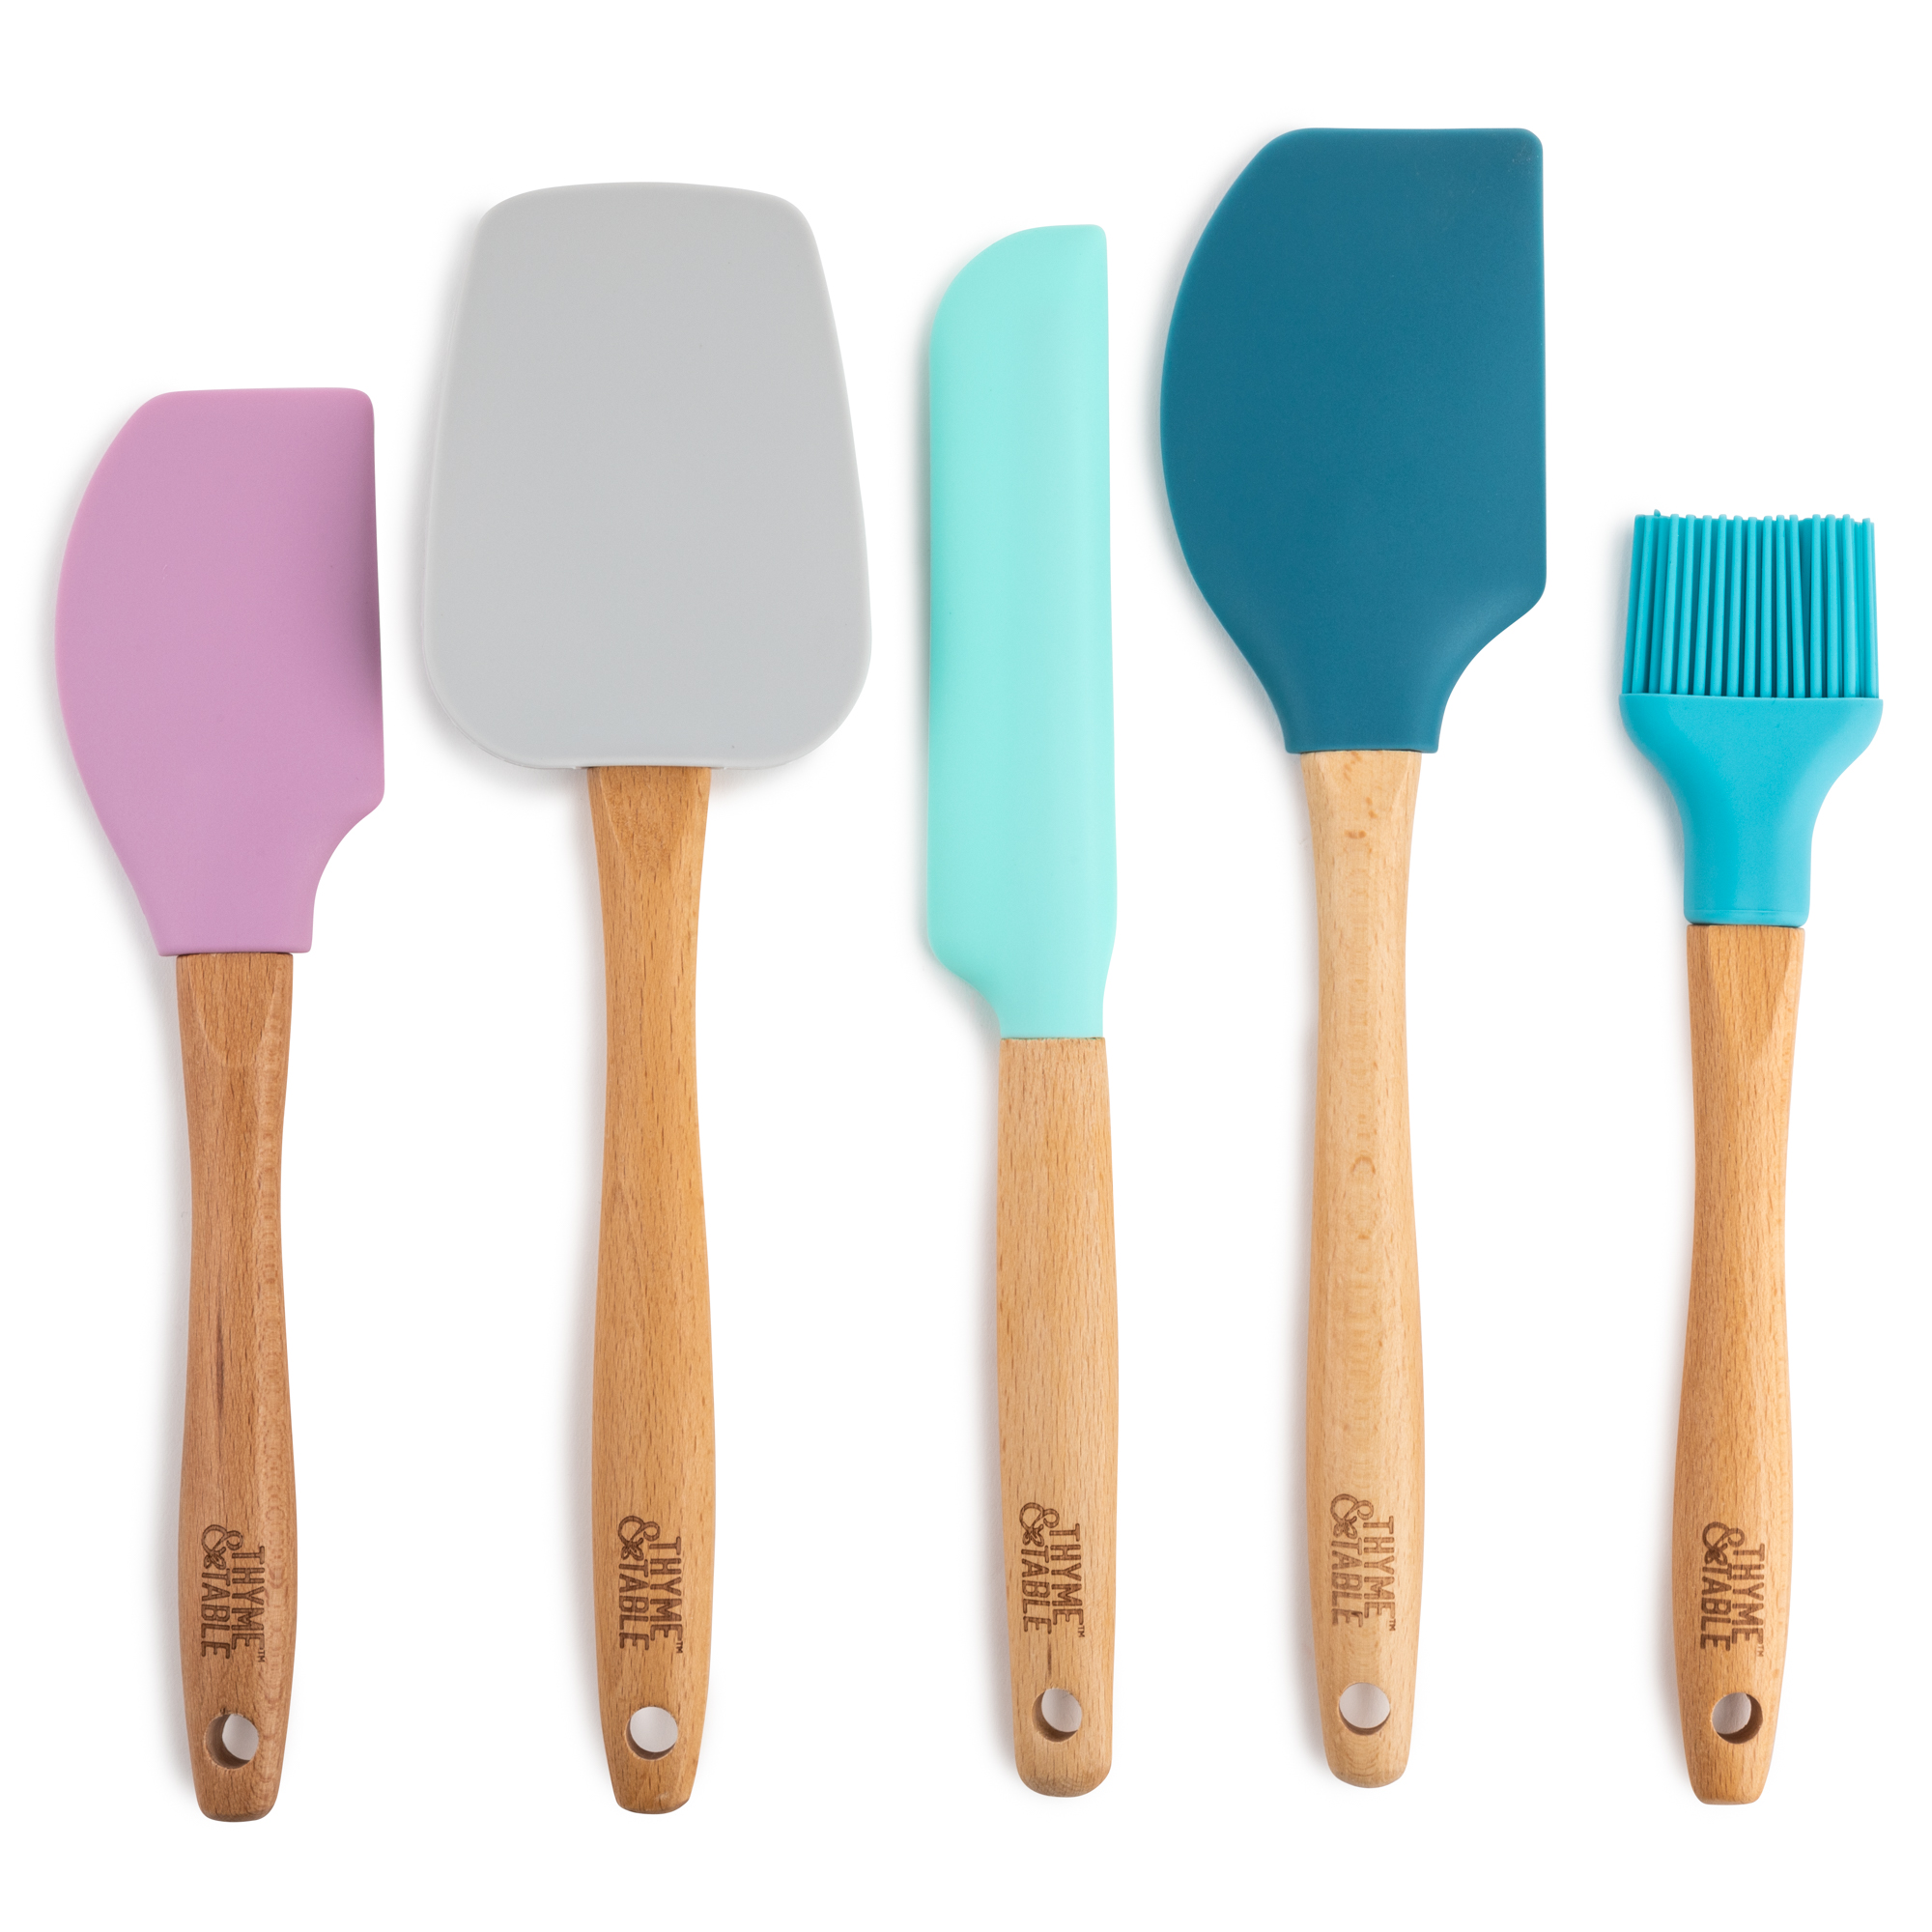 Thyme And Table Silicone Utensils